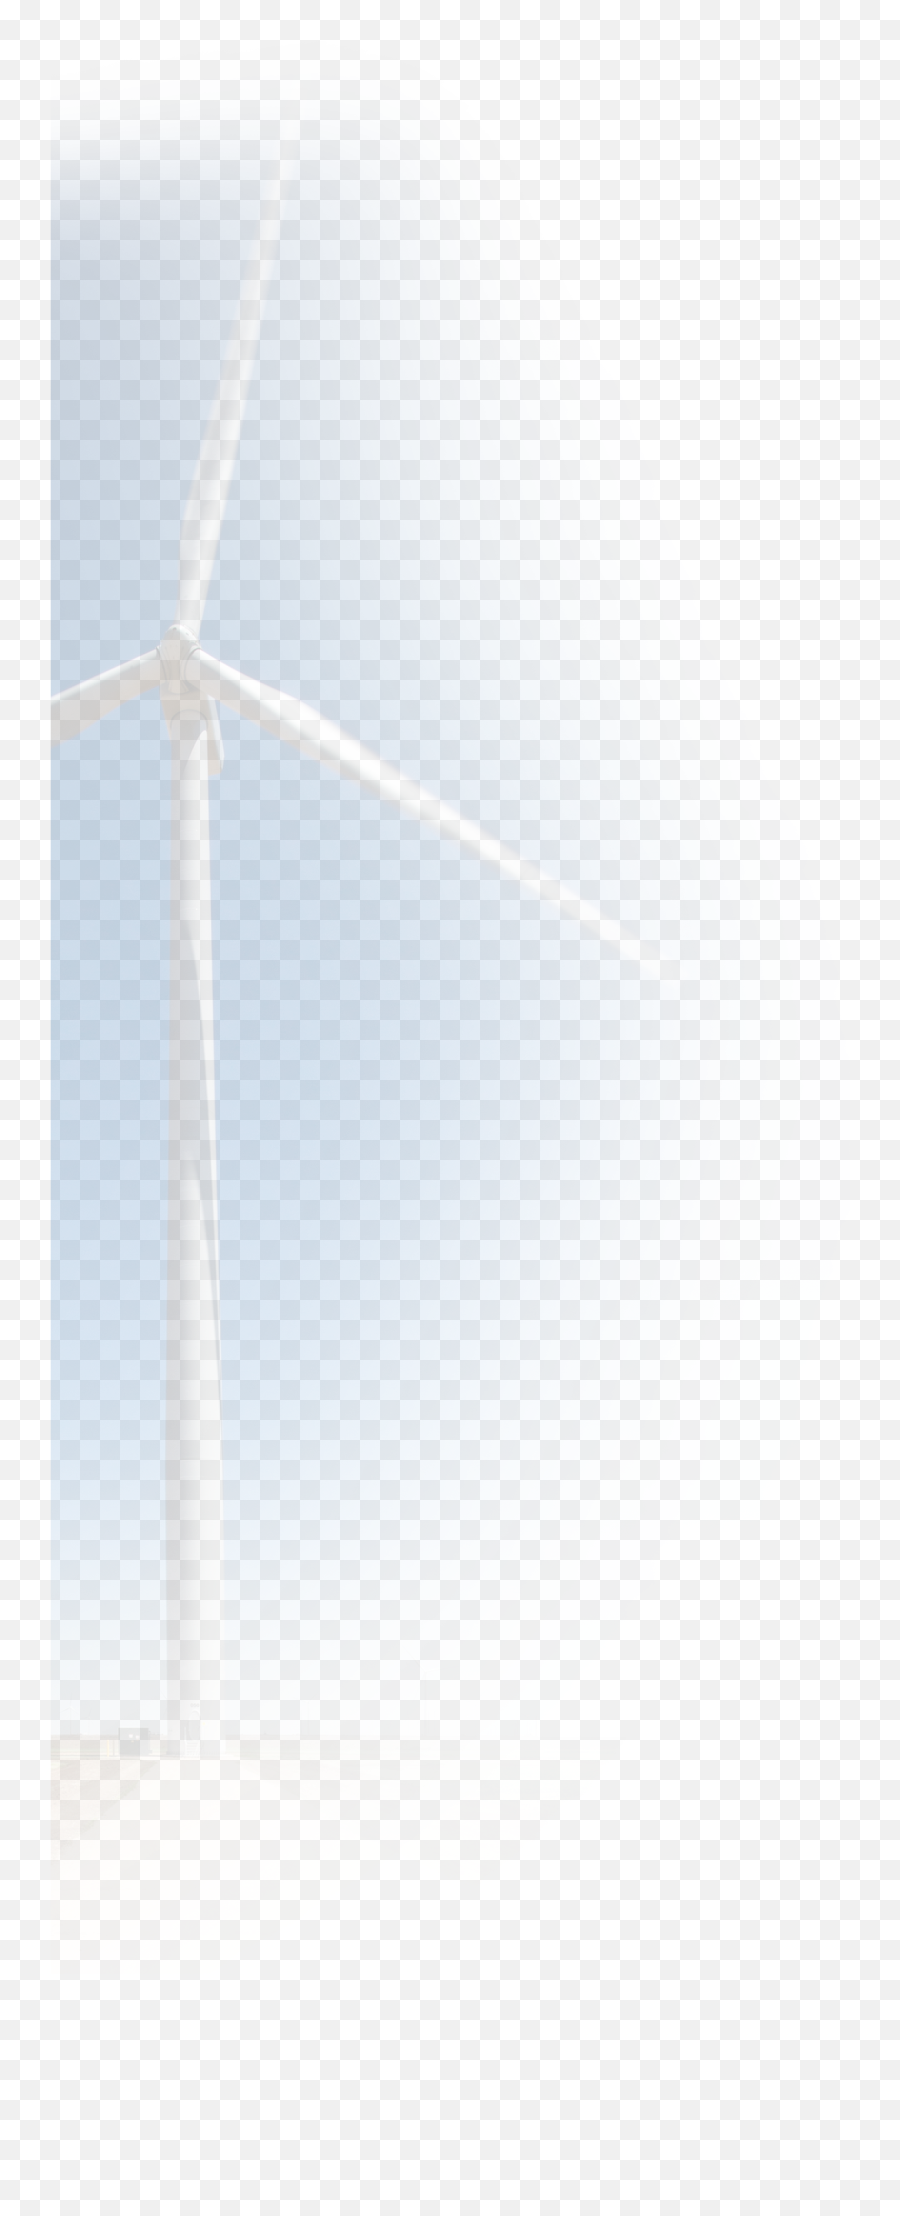 Download A Strong Investment Thesis - Wind Turbine Png Image Emoji,Wind Turbine Emoticon For Facebook